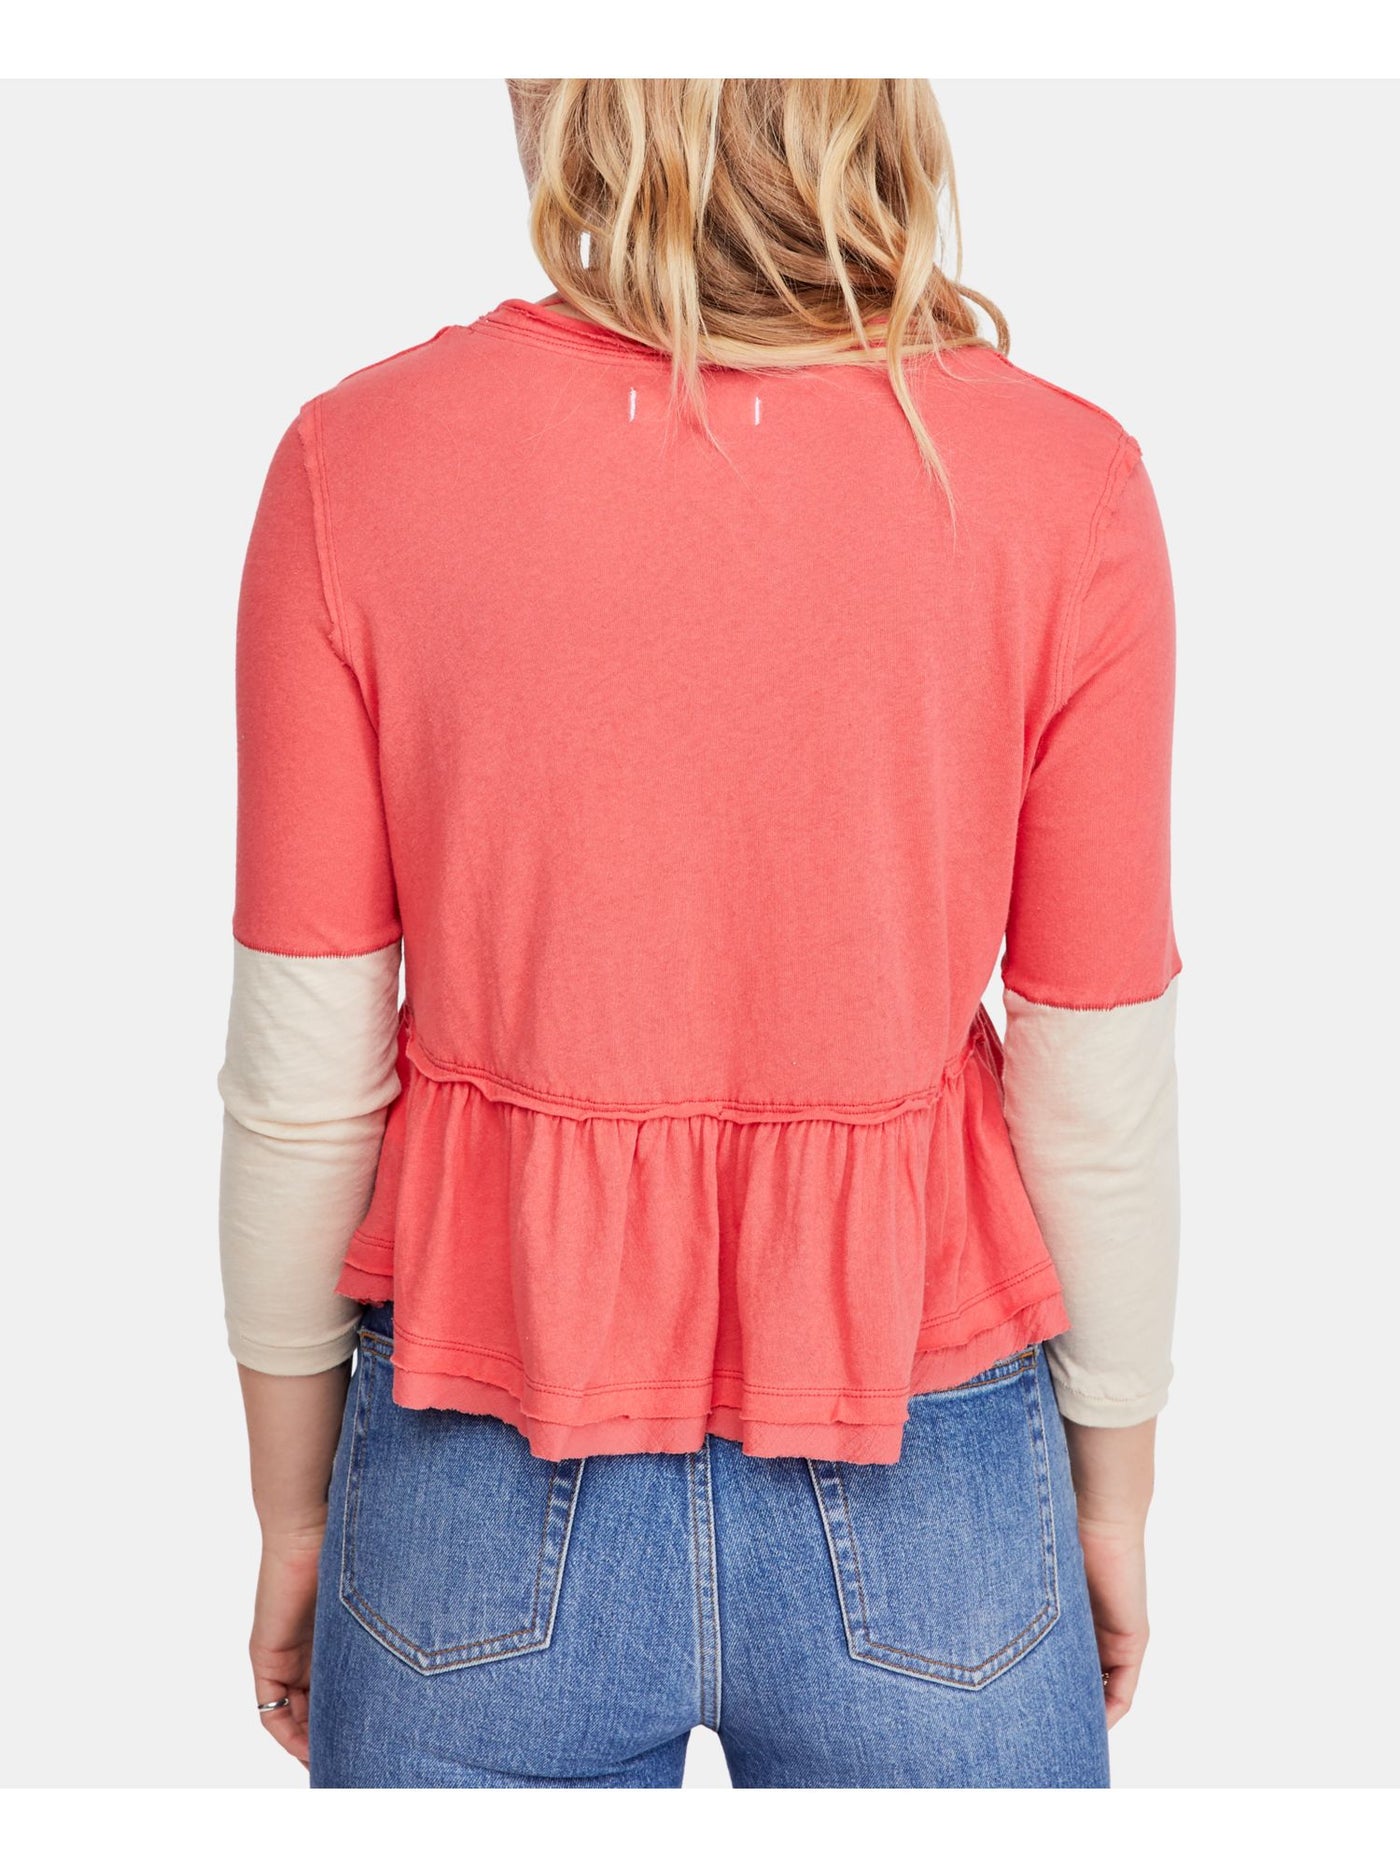 FREE PEOPLE Womens Coral Ruffled Color Block 3/4 Sleeve V Neck Blouse S